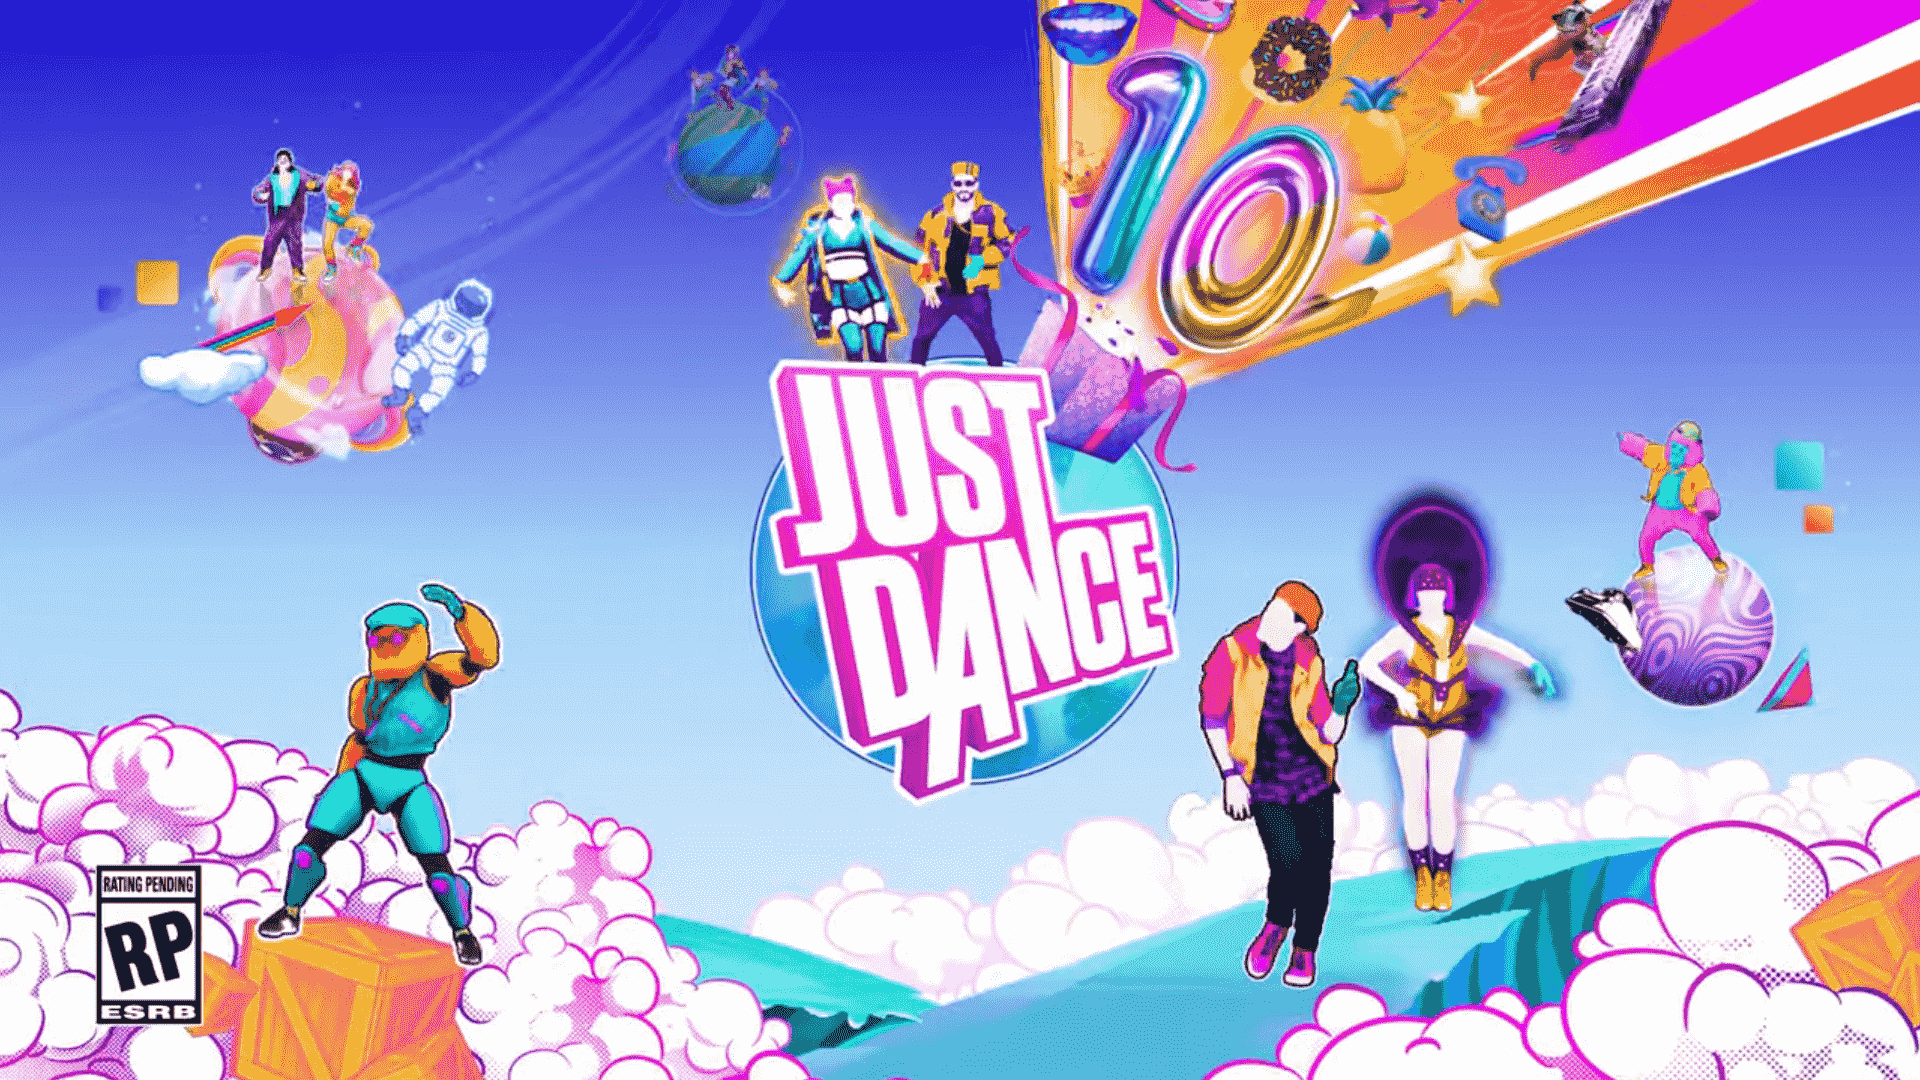 Just Dance 2020 to The Unknown